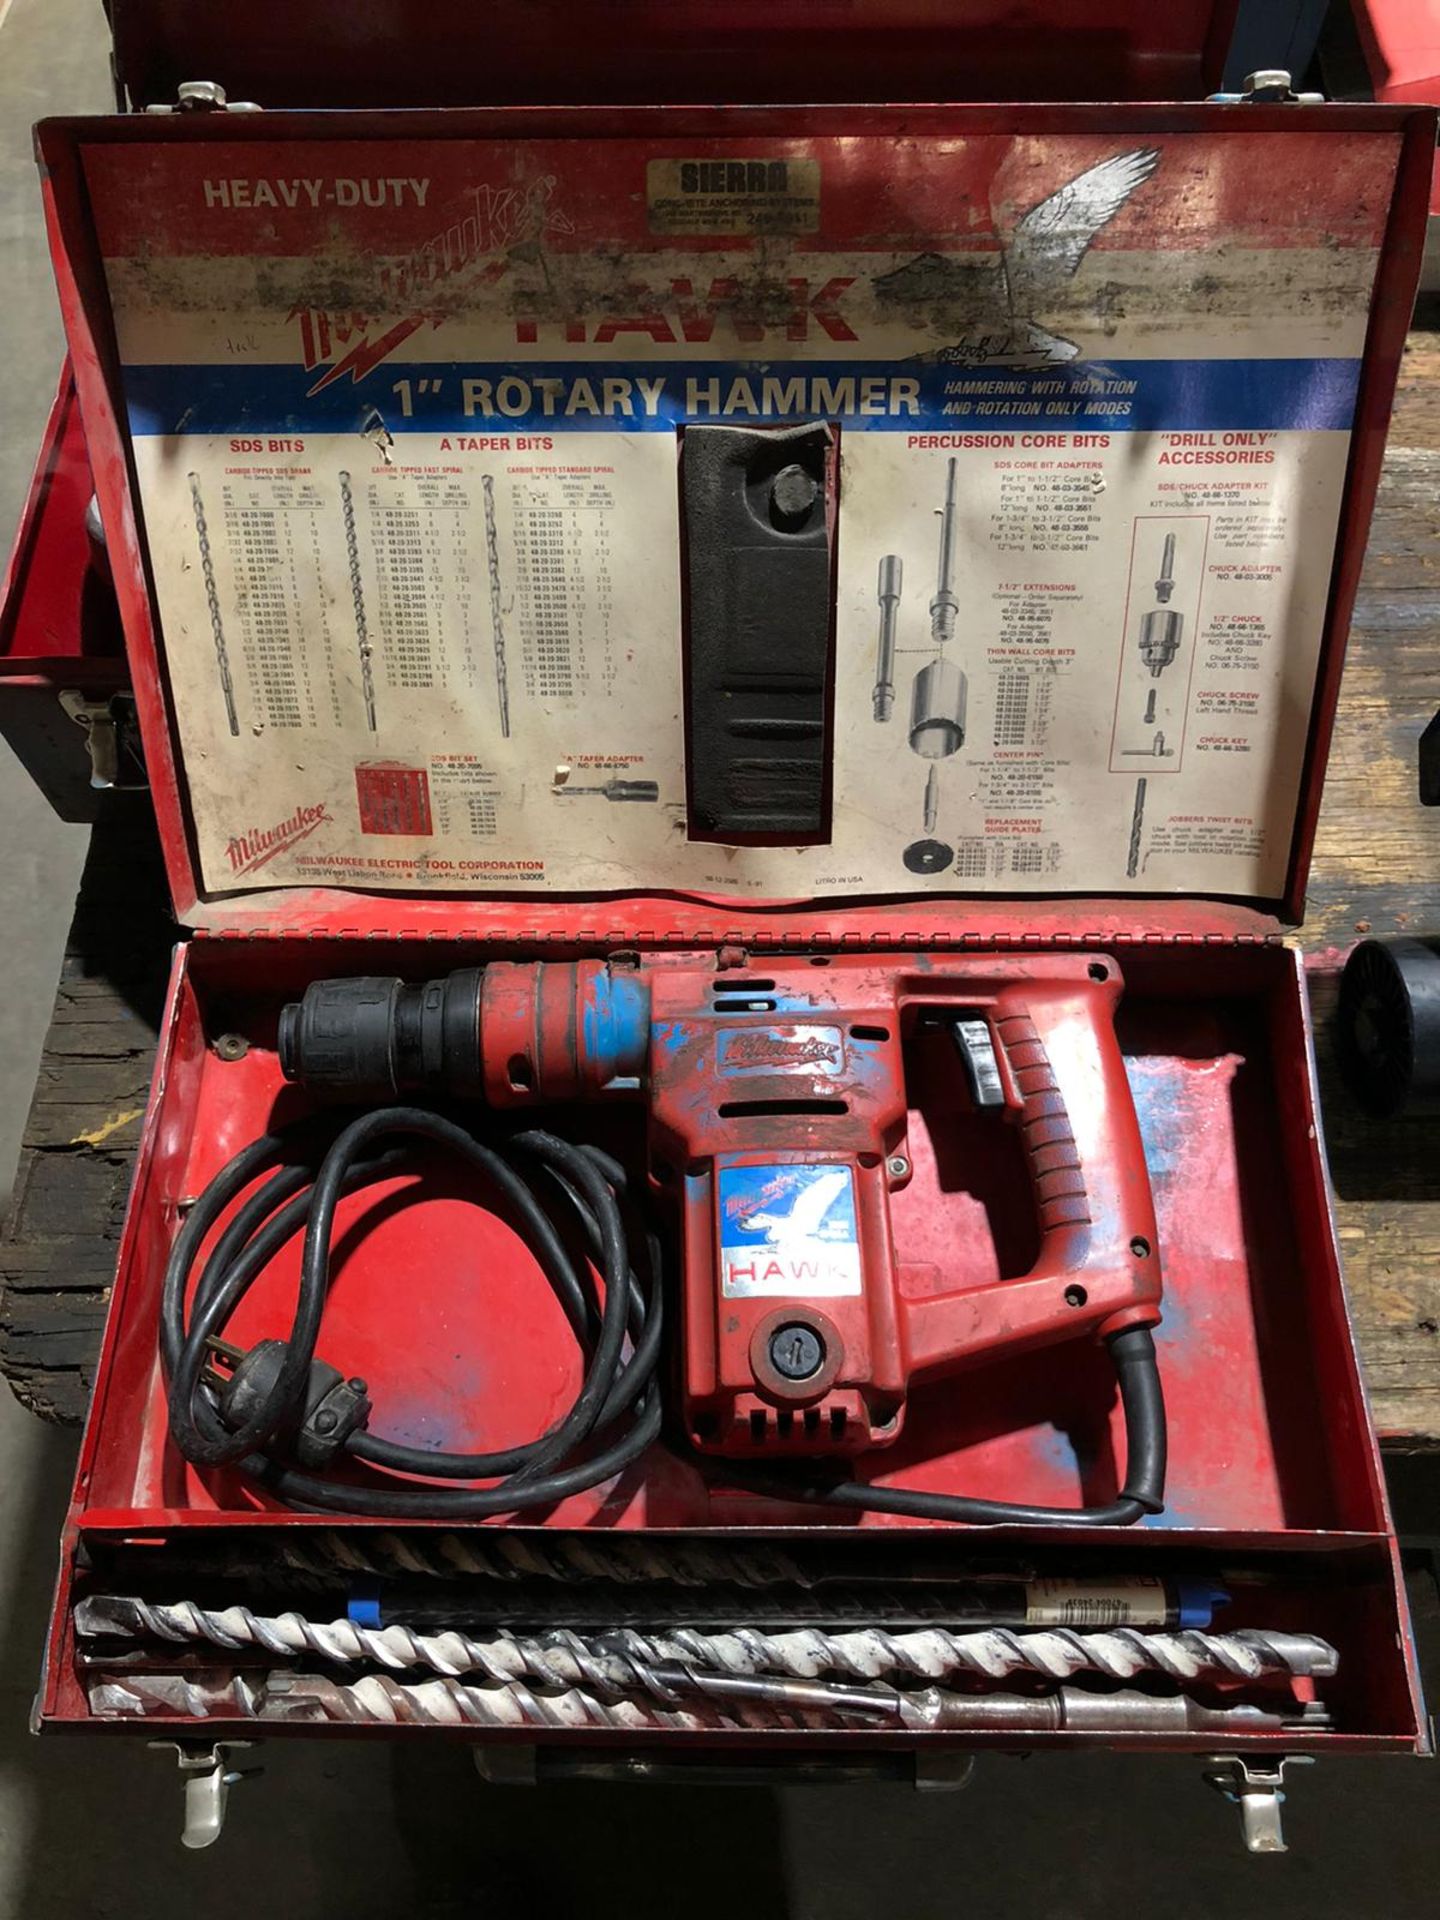 Milwauke Heavy Duty 1" Rotary Hammer Drill with Hammer Drill Bits in Case